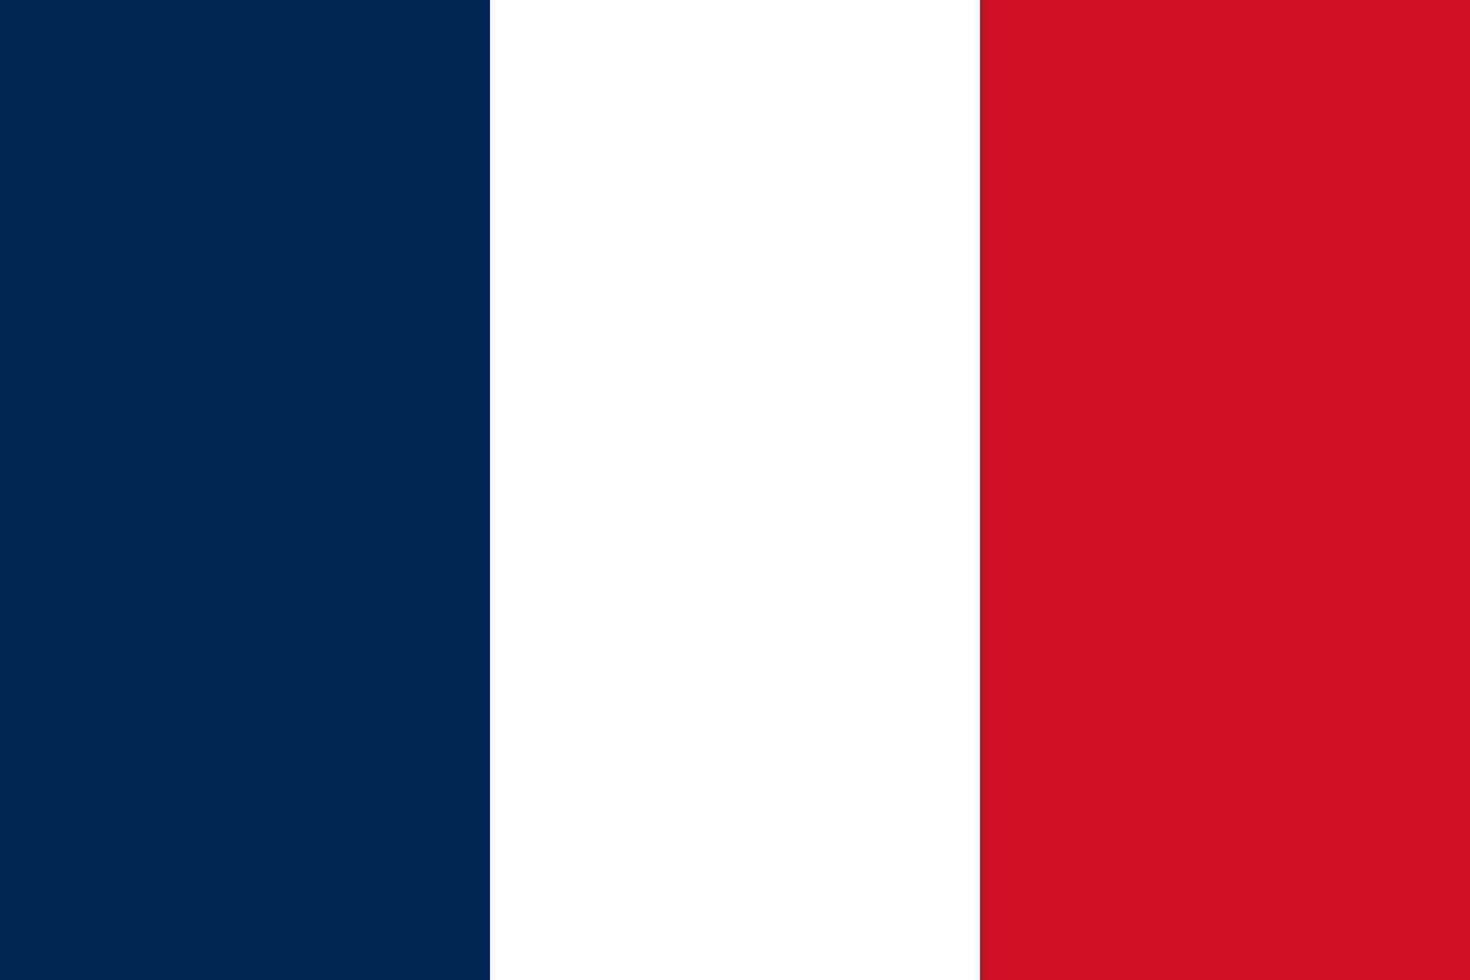 Proudly French - Showcase the tricolor beauty of the French flag through a striking vector illustration. Celebrate the spirit of France with this vibrant graphic